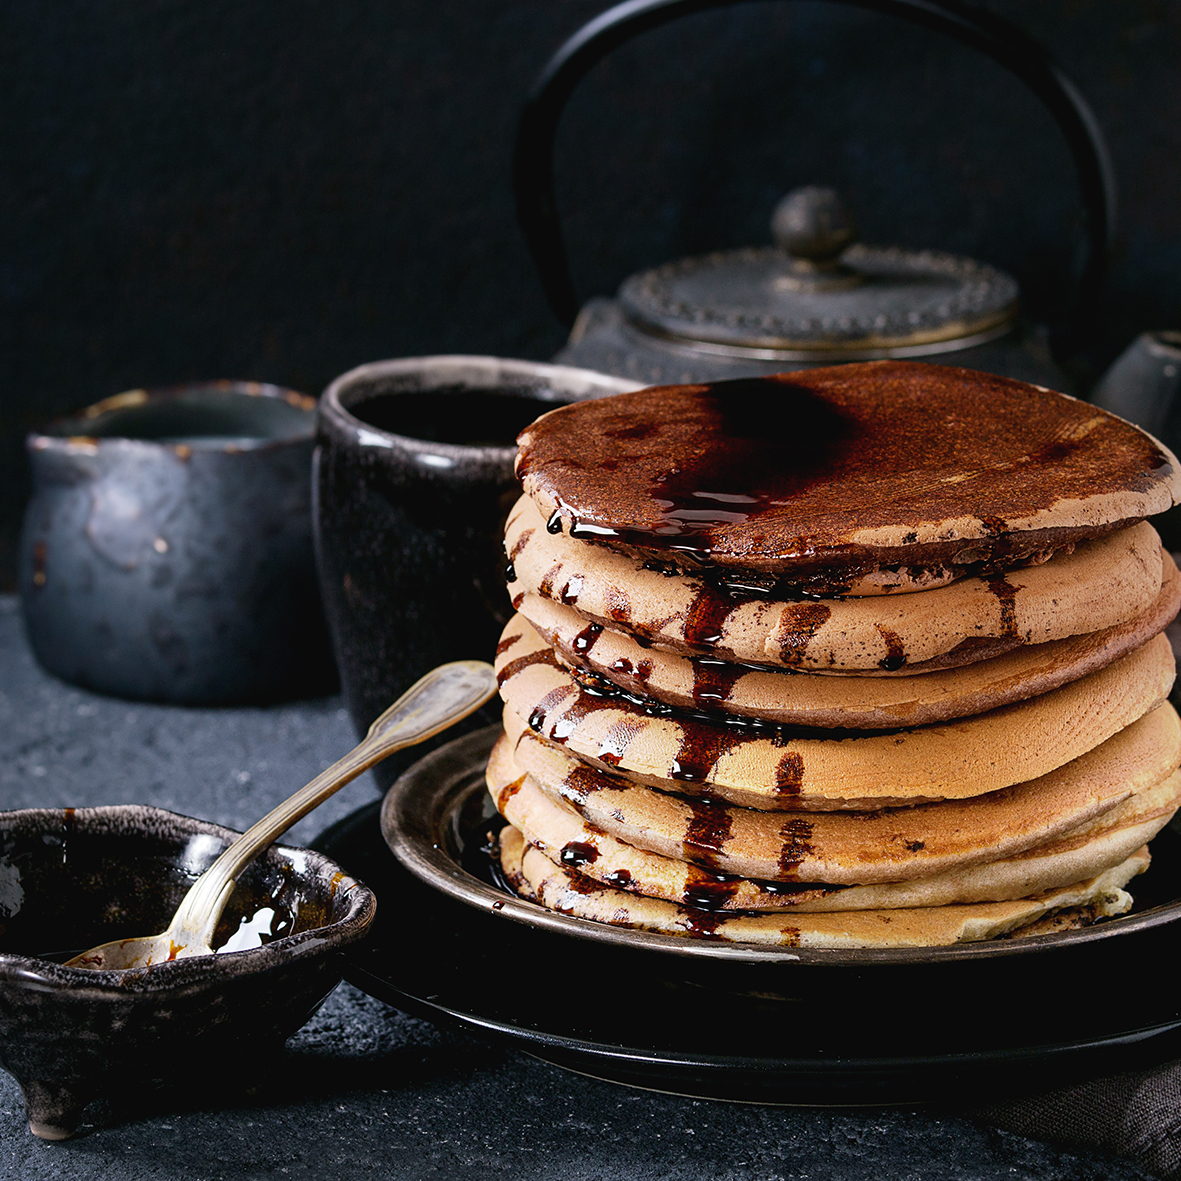 American Pancakes with a coffee twist and rich coffee syrup